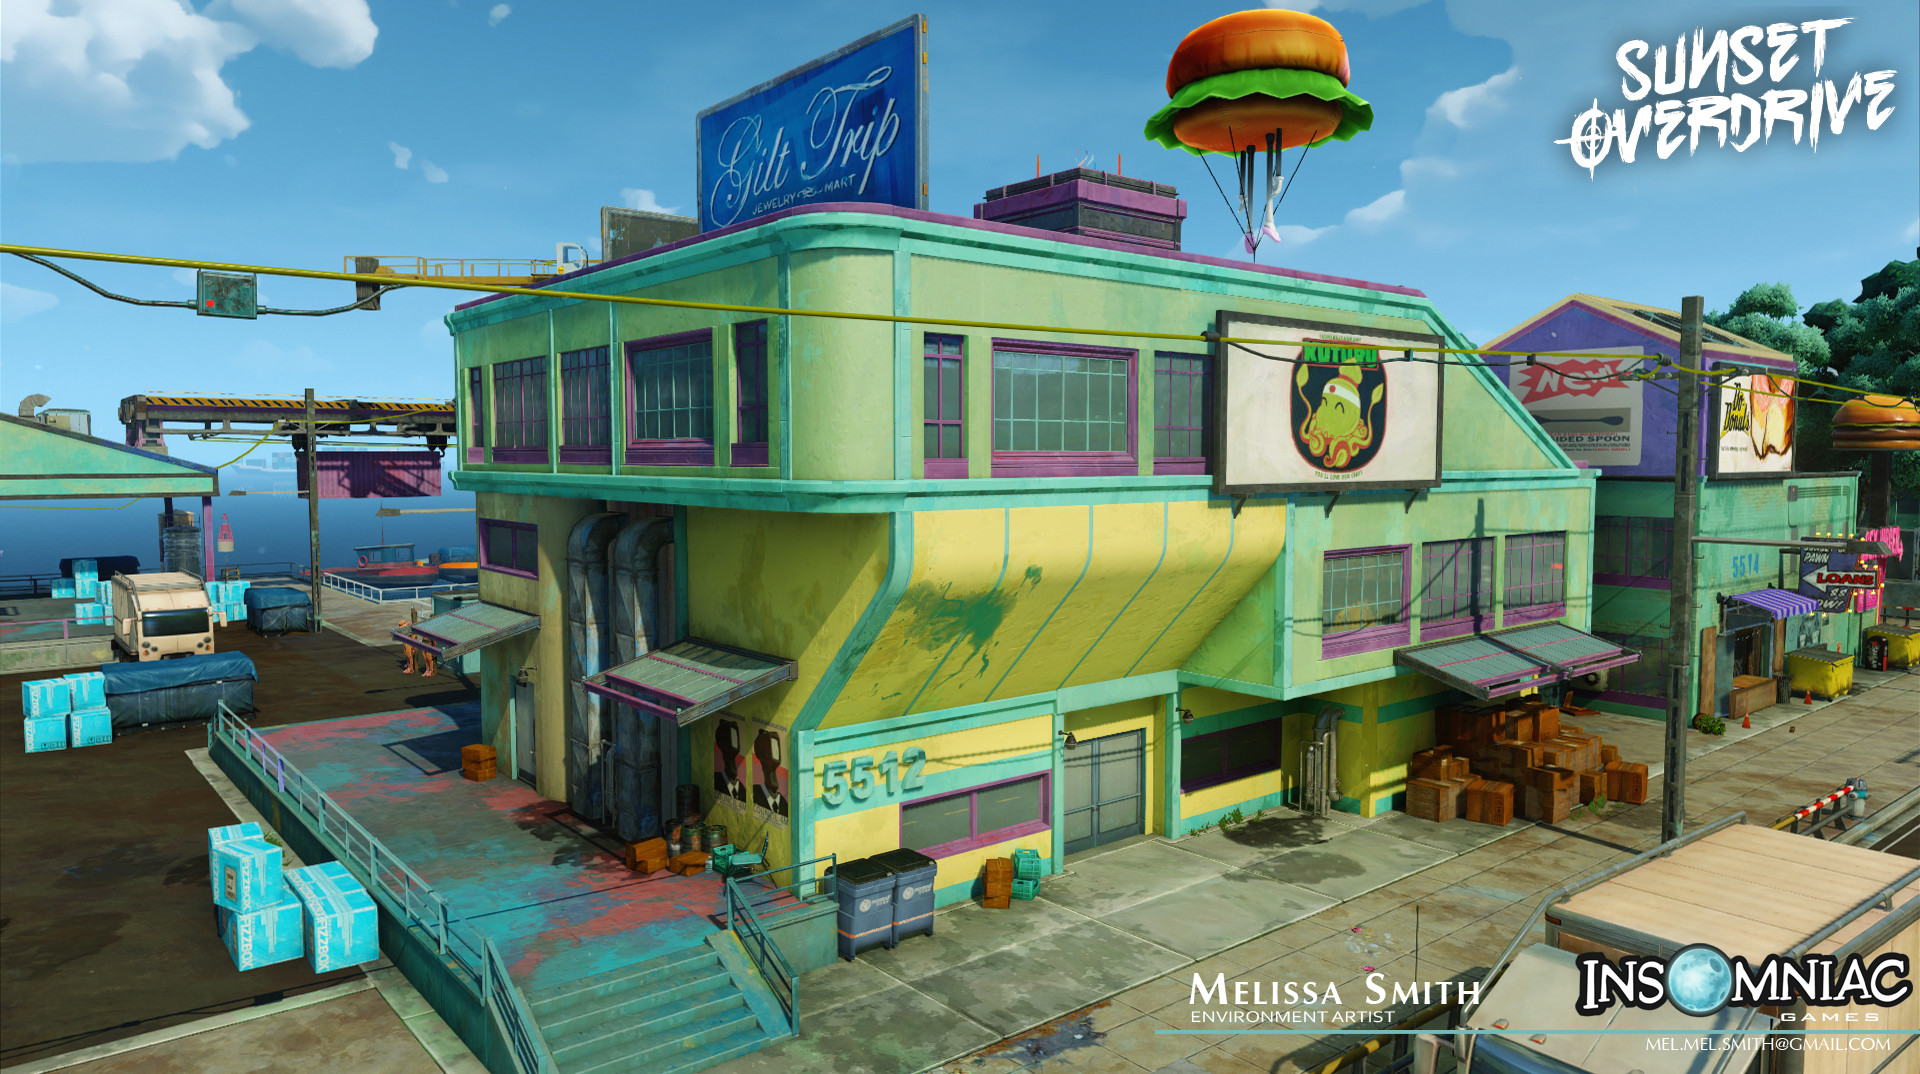 ArtStation - Sunset Overdrive Early Environment Concepts